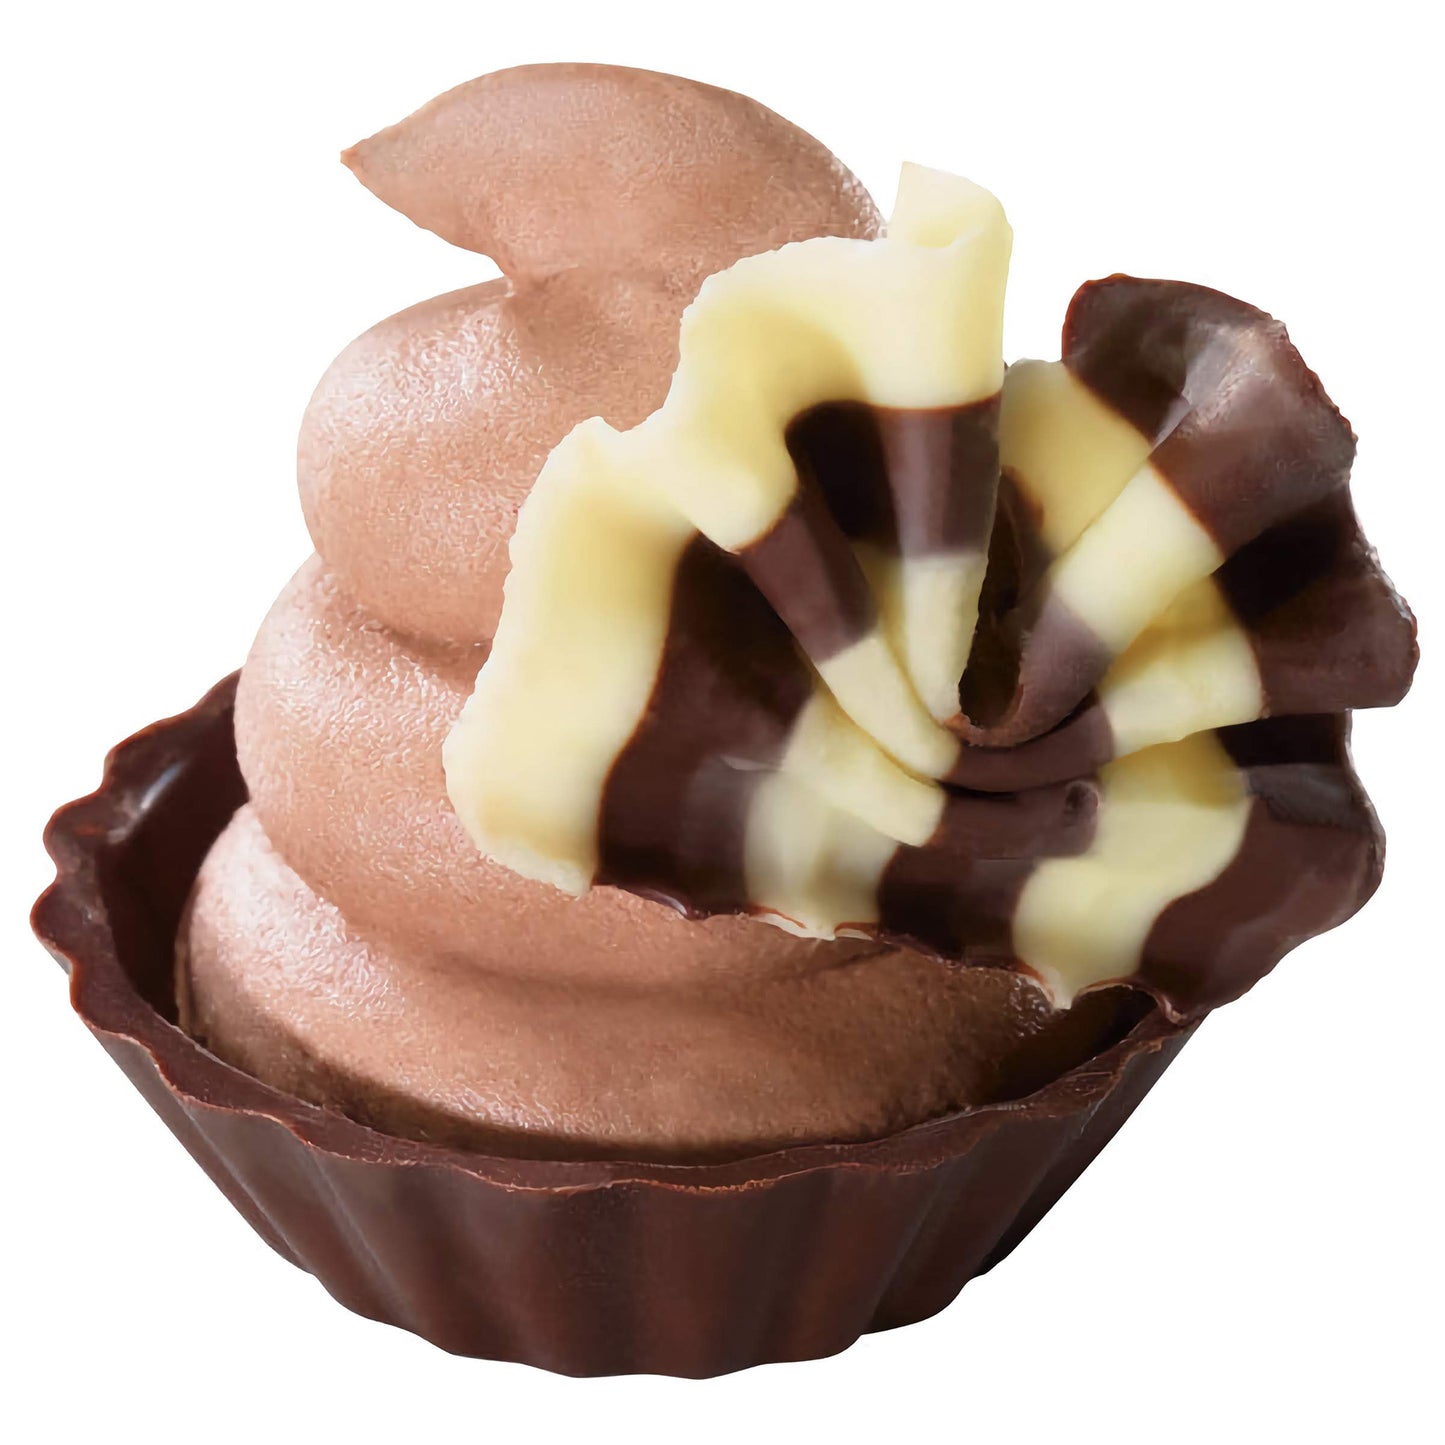 Elegant dark and white Belgian chocolate shavings atop a rich chocolate dessert cup, demonstrating a stylish and appealing chocolate dessert option.